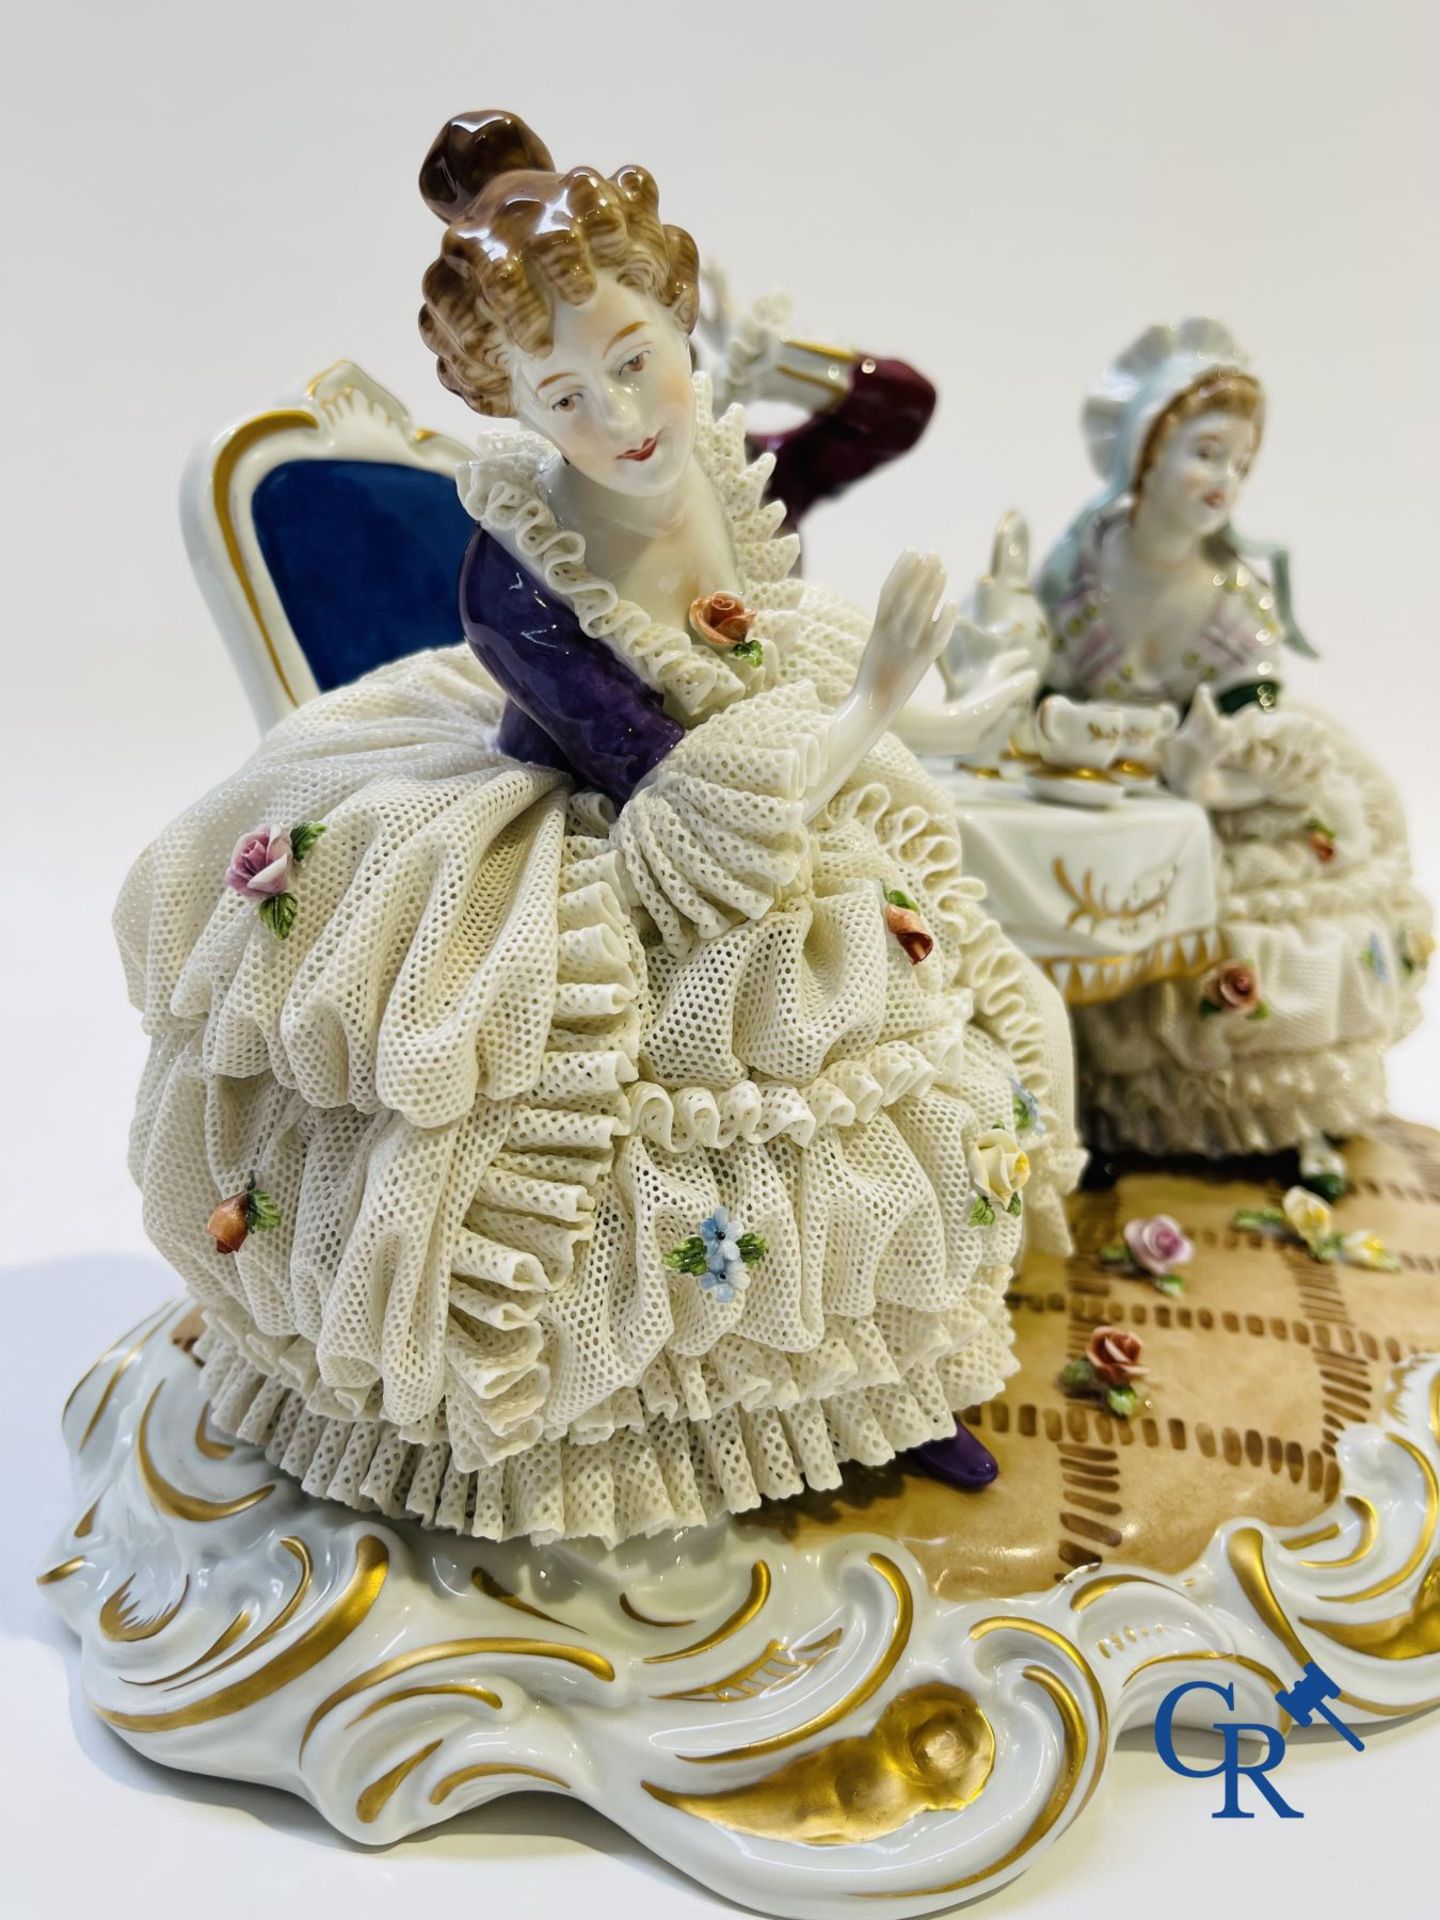 Porcelain: Unterweissbach: "In the tea room". - Image 8 of 9